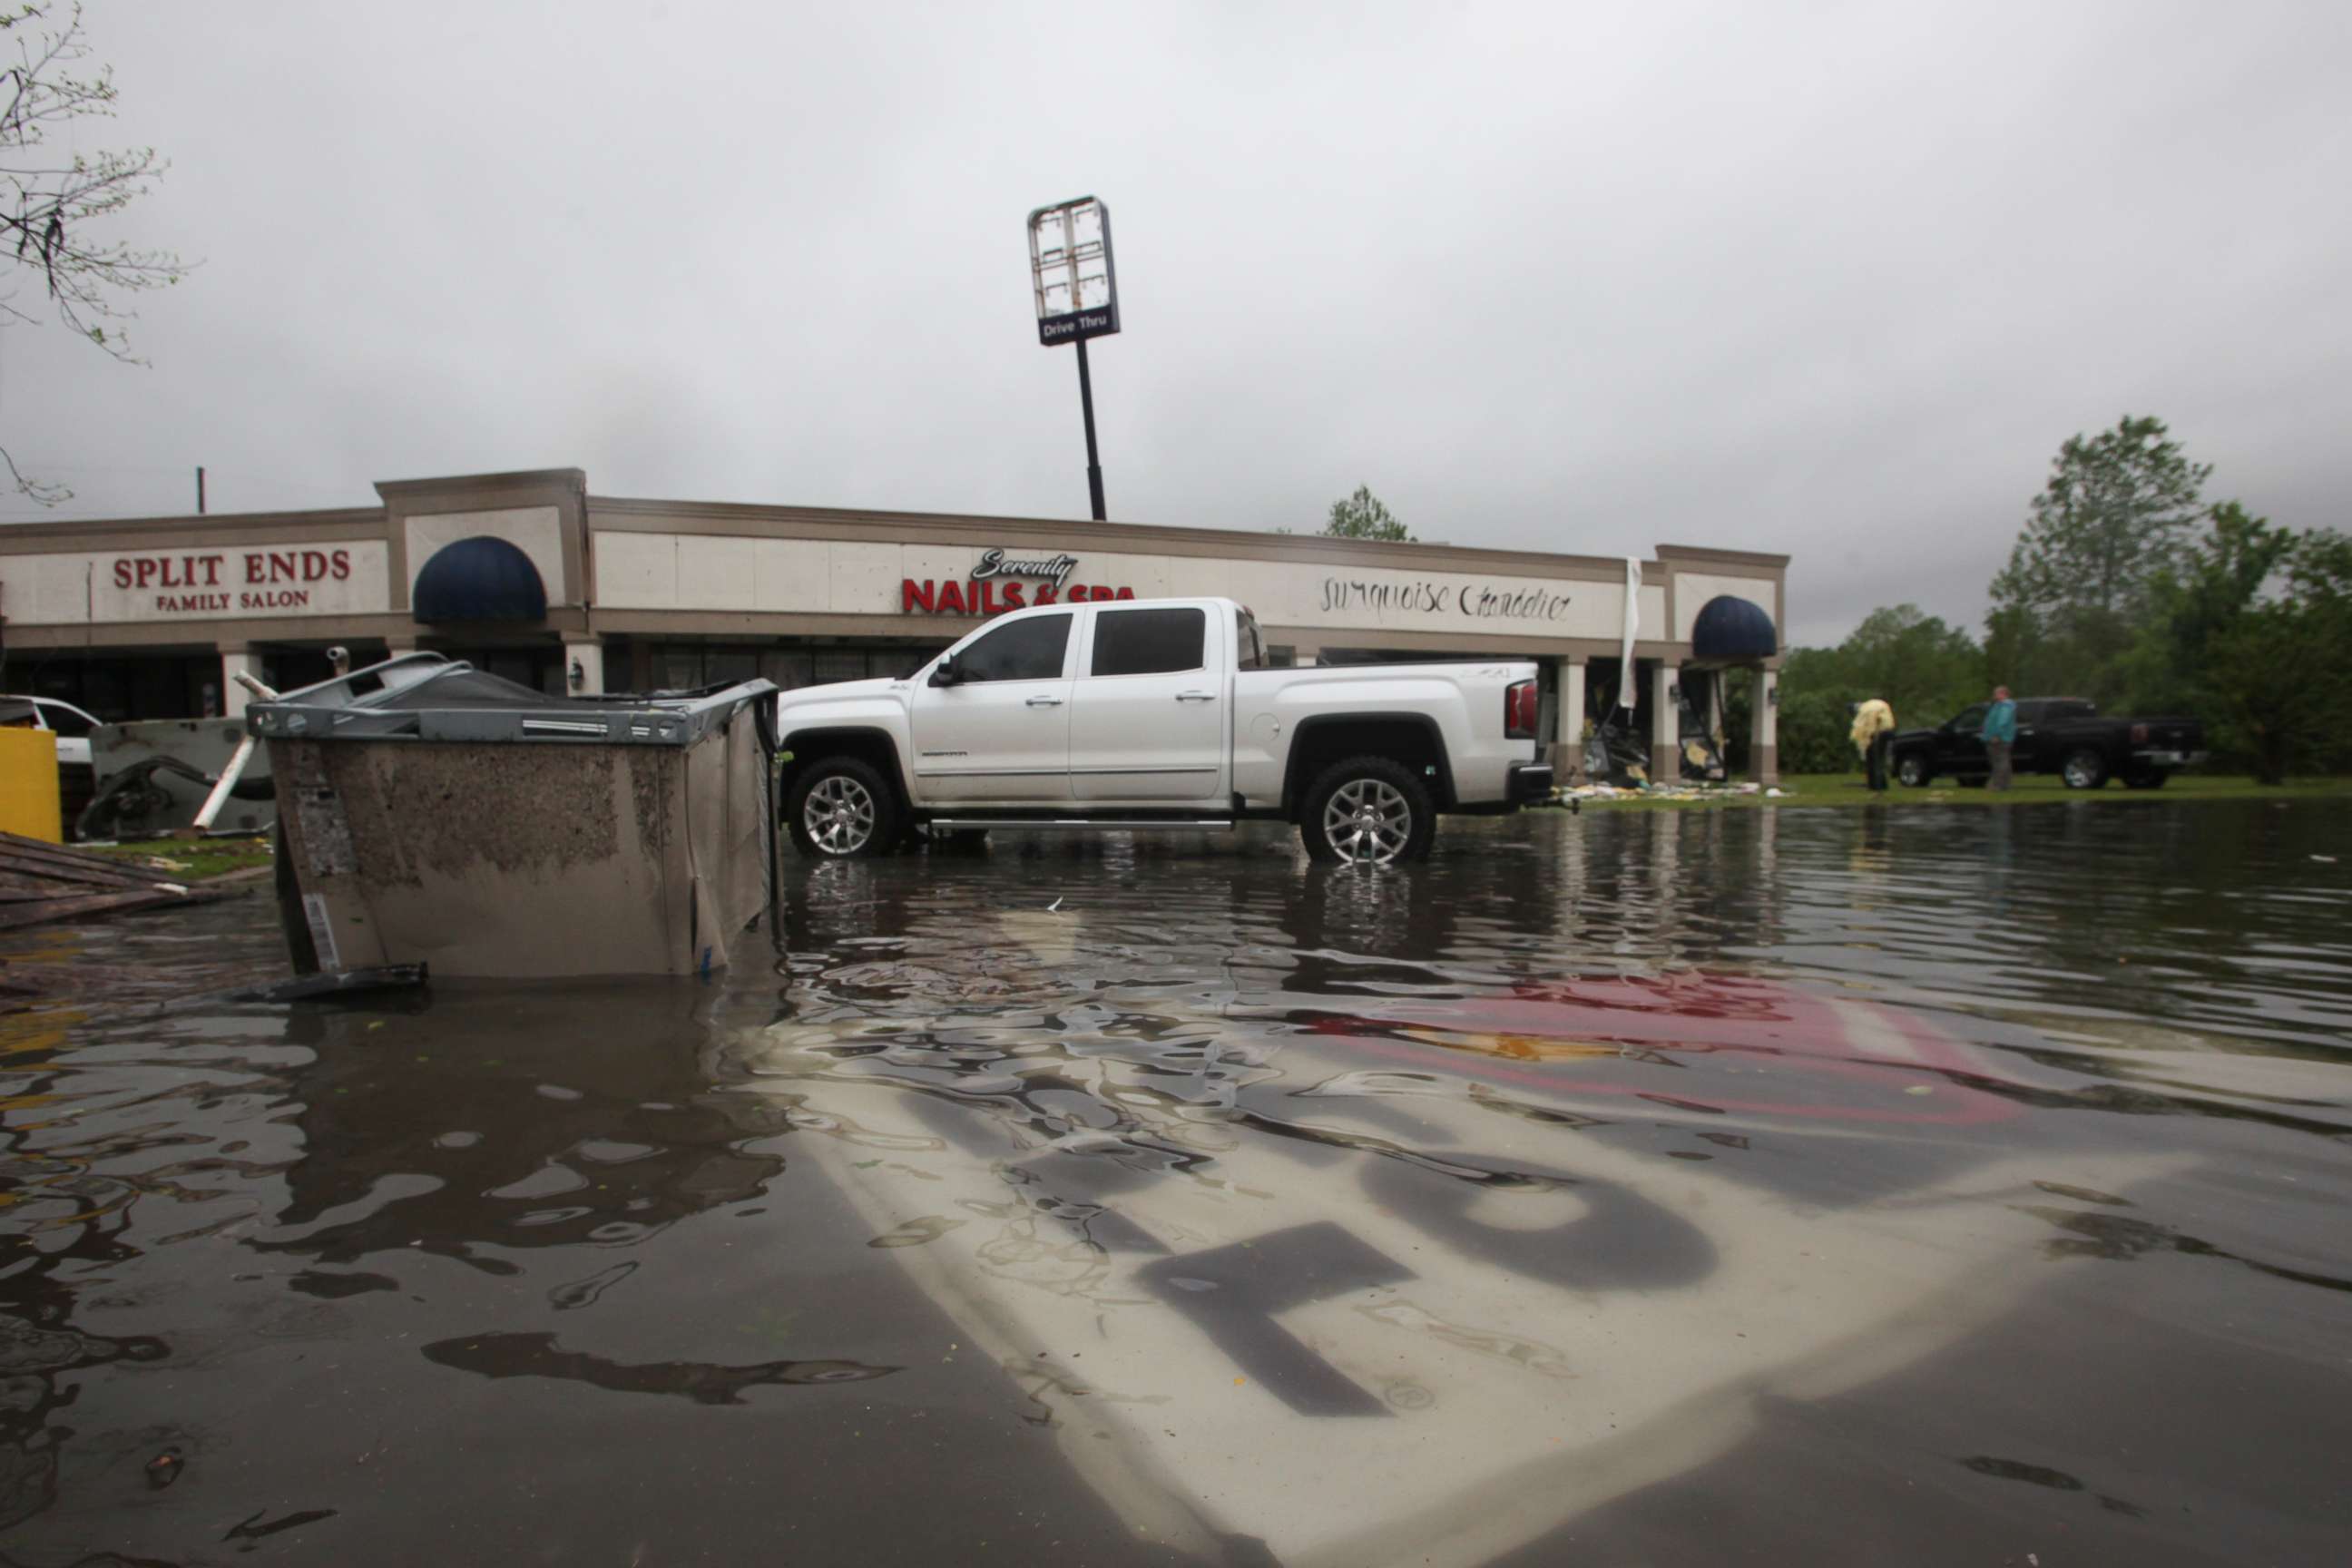 PHOTO: Debris is strewn in flooded water in the Pemberton Quarters strip mall following severe weather, April 13, 2019, in Vicksburg, Miss. 